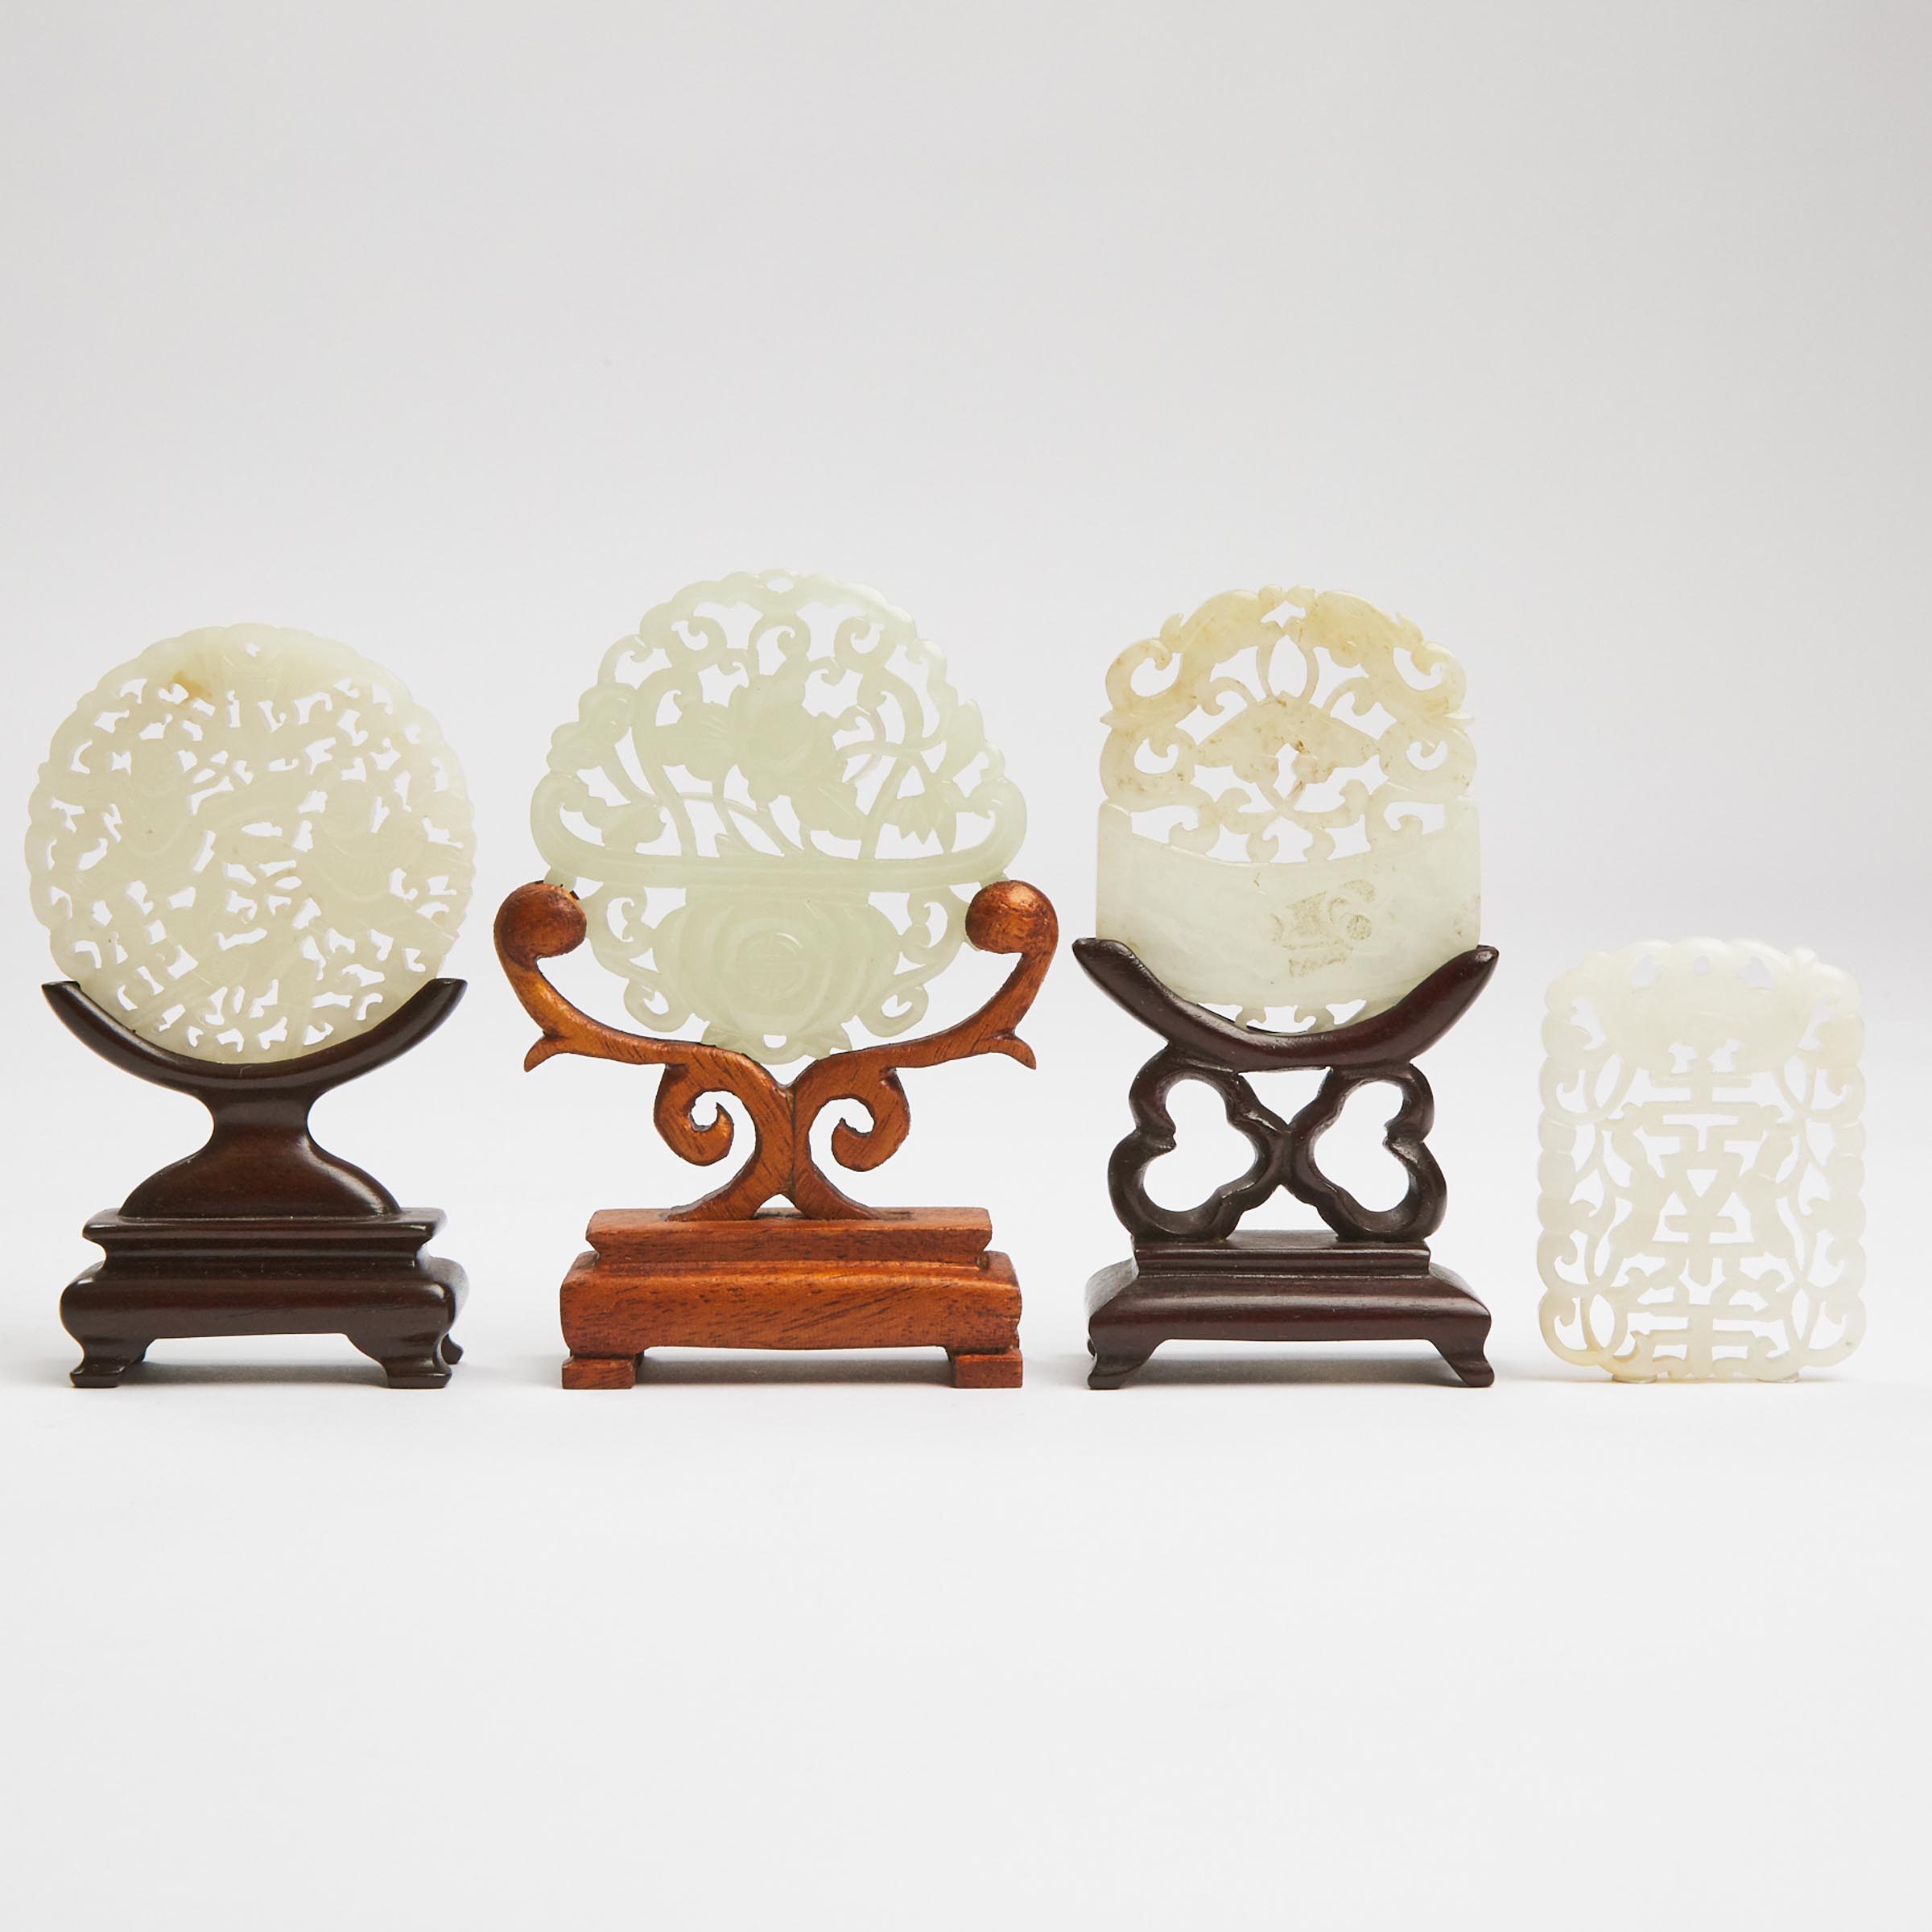 A Group of Four Carved and Pierced White Jade Plaques, Ming/Qing Dynasty